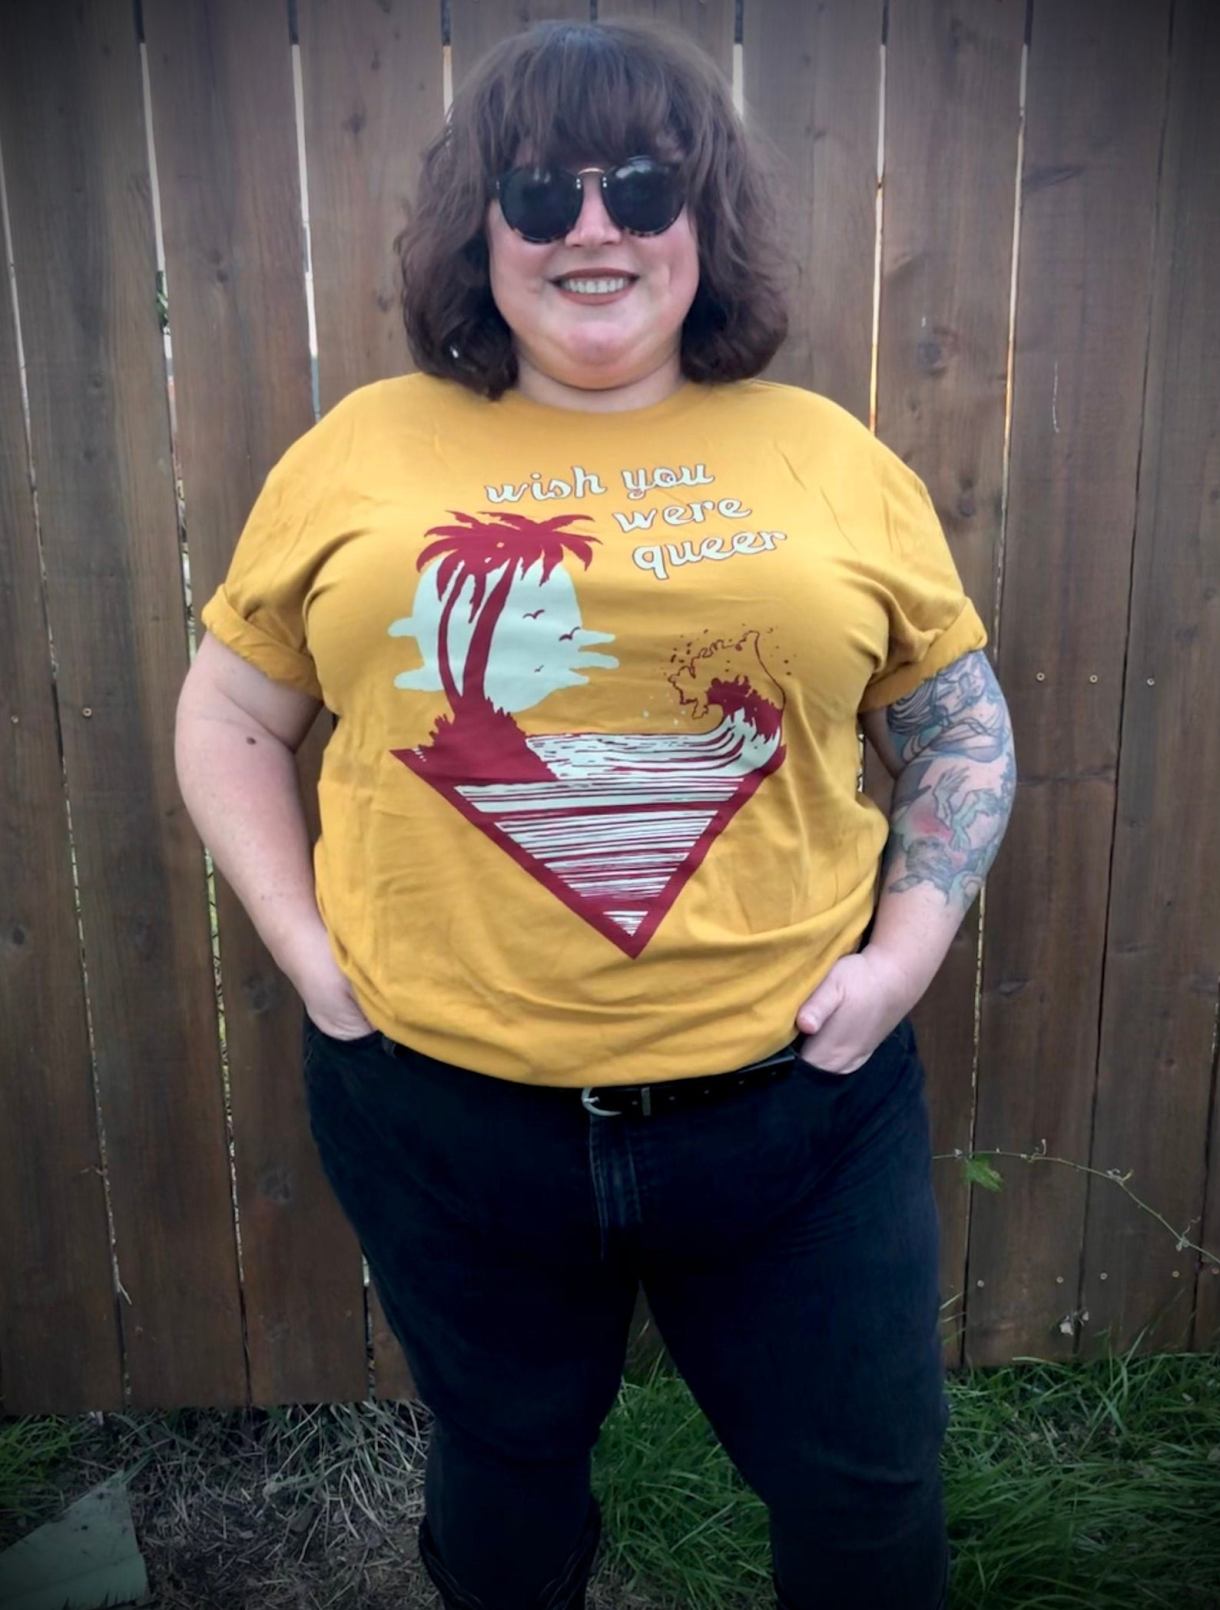 Model wearing a mustard yellow t-shirt that says "wish you were queer" on it with a picture of a palm tree on an island and a wave in maroon and light blue.